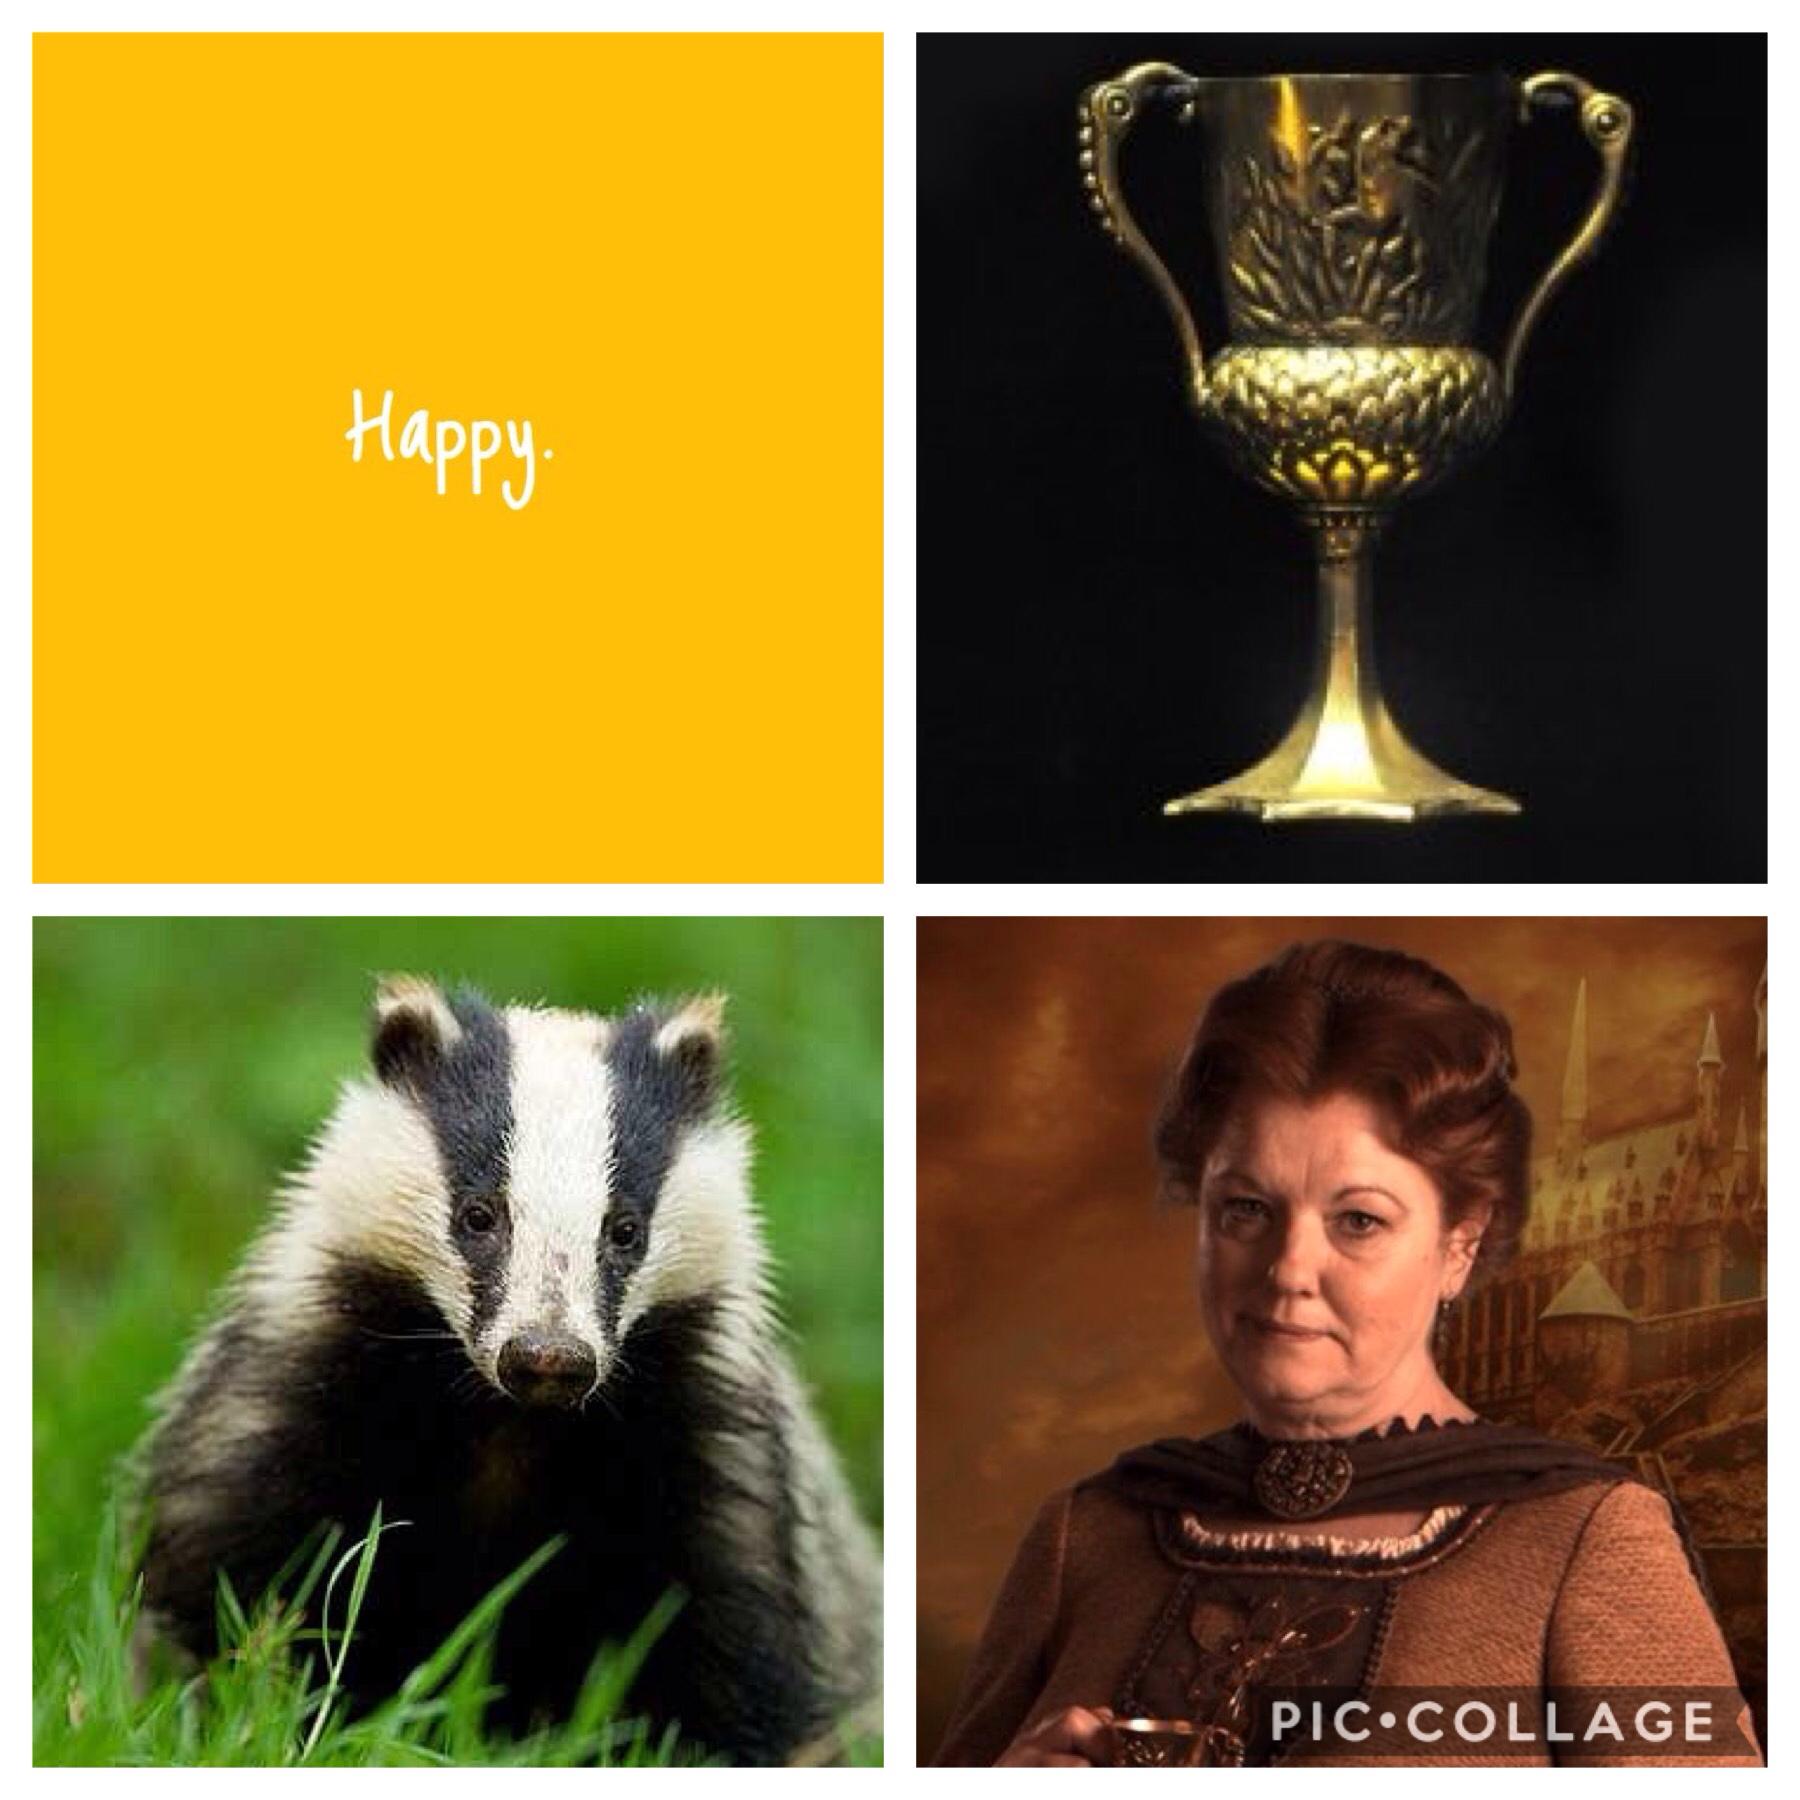 Last, but definitely not least of the Hogwarts Houses, Hufflepuff! Here's the Hufflepuff aesthetic and sorry that I haven't gene on much 🙃